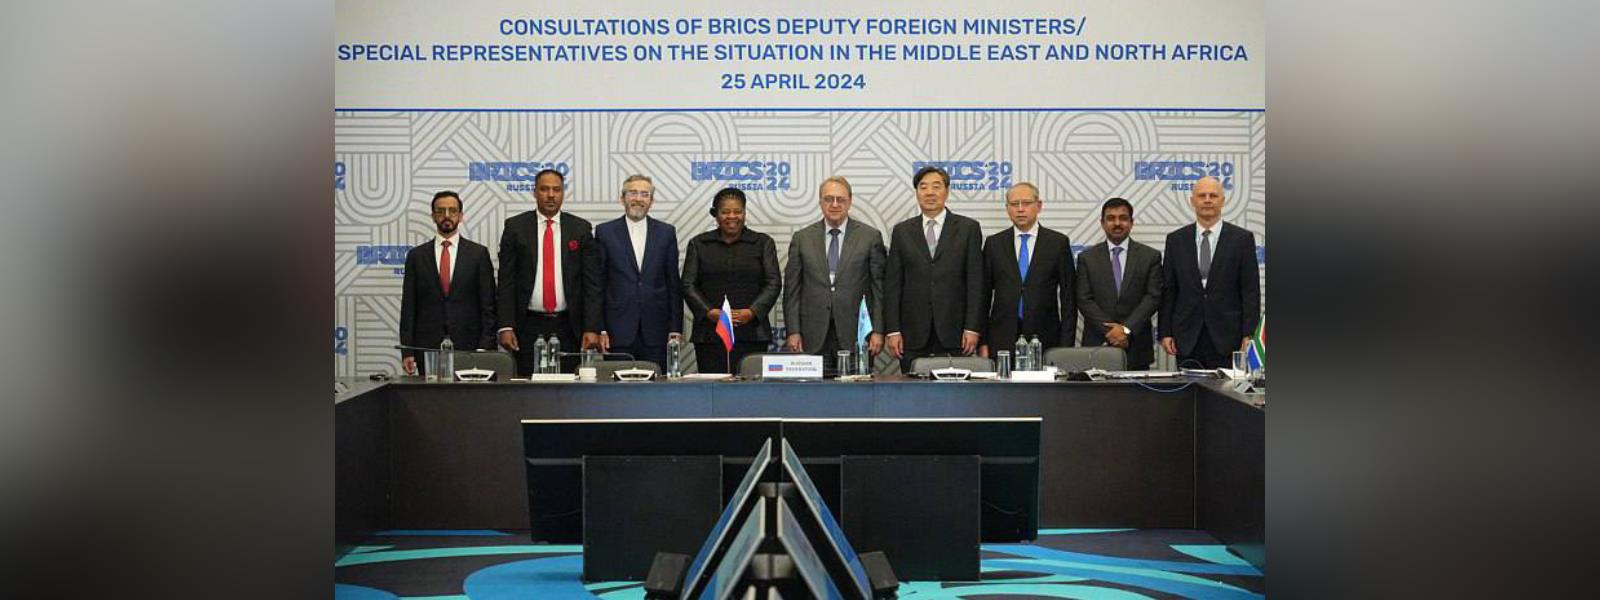 Secretary (CPV & OIA) Shri Muktesh K. Pardeshi led the Indian delegation at the meeting of BRICS Deputy Foreign Ministers and Special Envoys on the Middle East and North Africa in Moscow